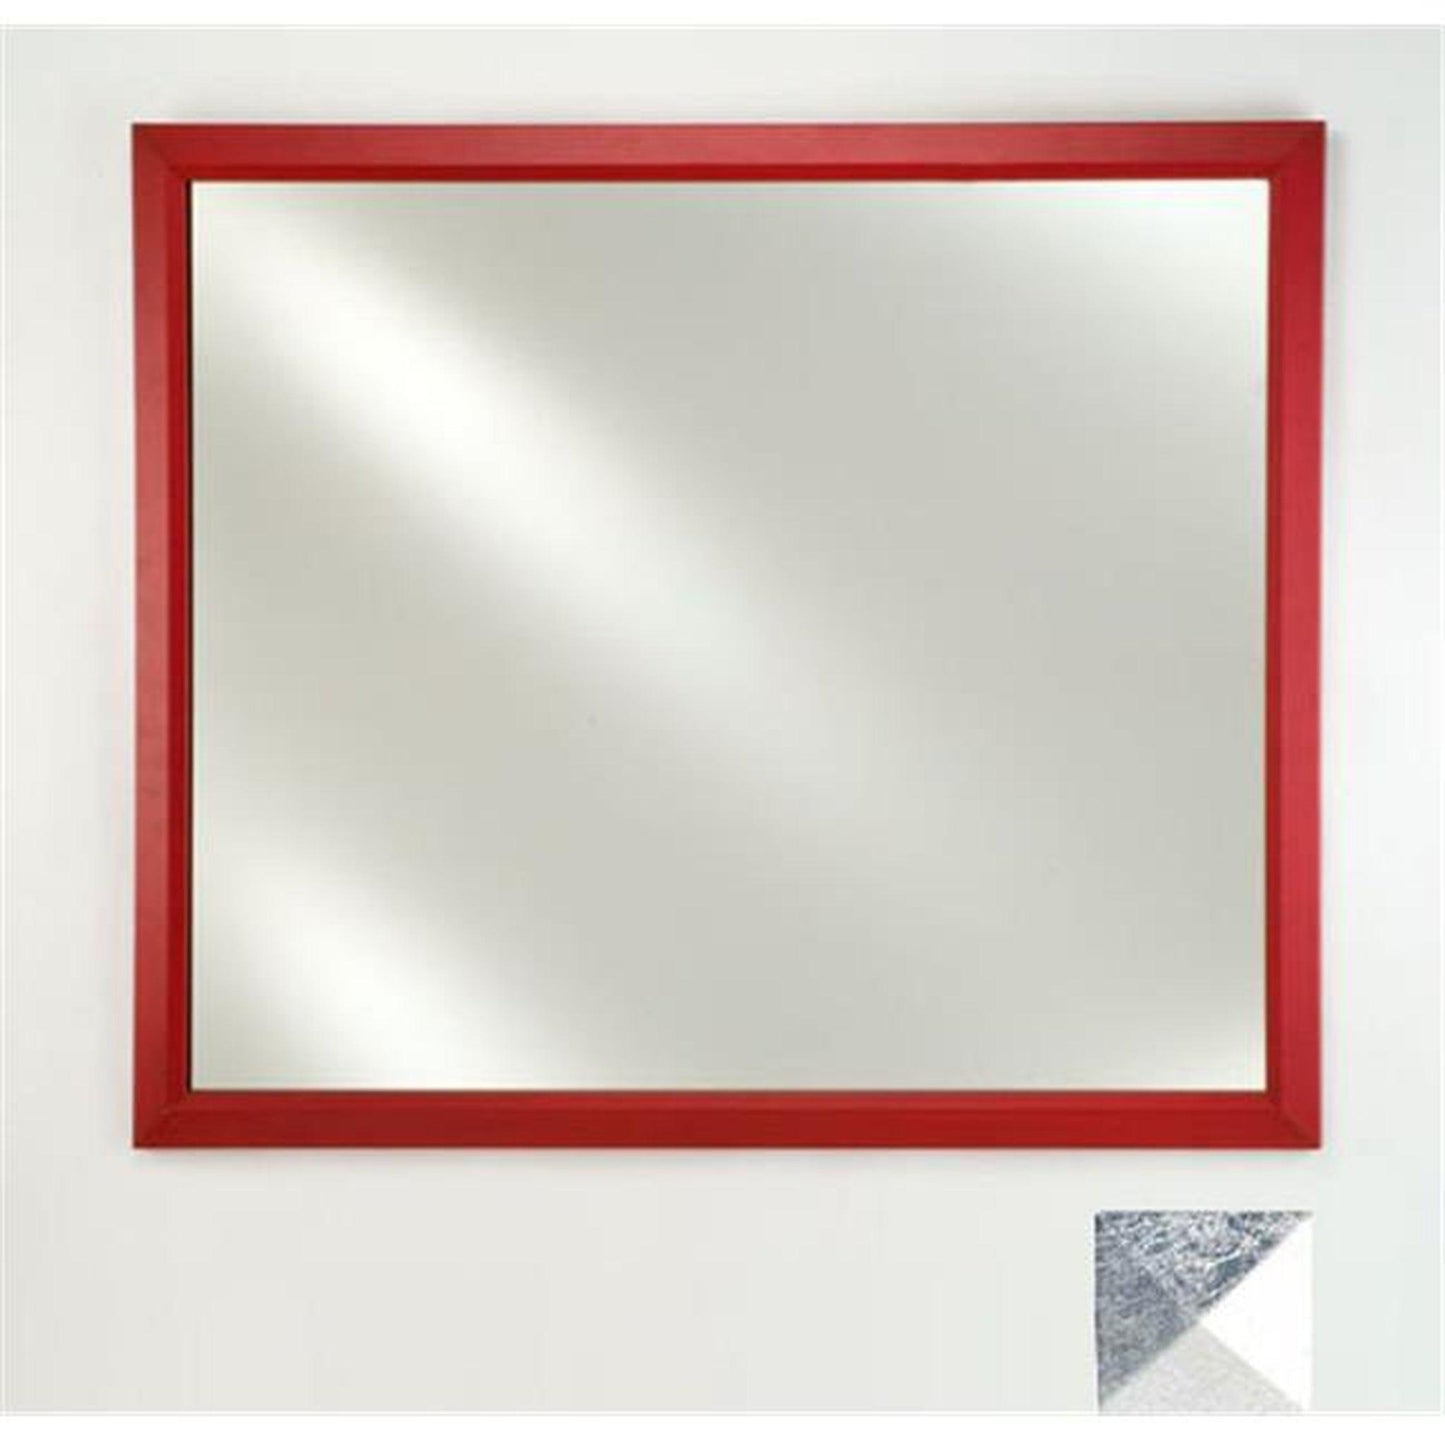 Afina Signature 16" x 22" Meridian Antique Silver With Antique Silver Caps Framed Mirror With Plain Edge